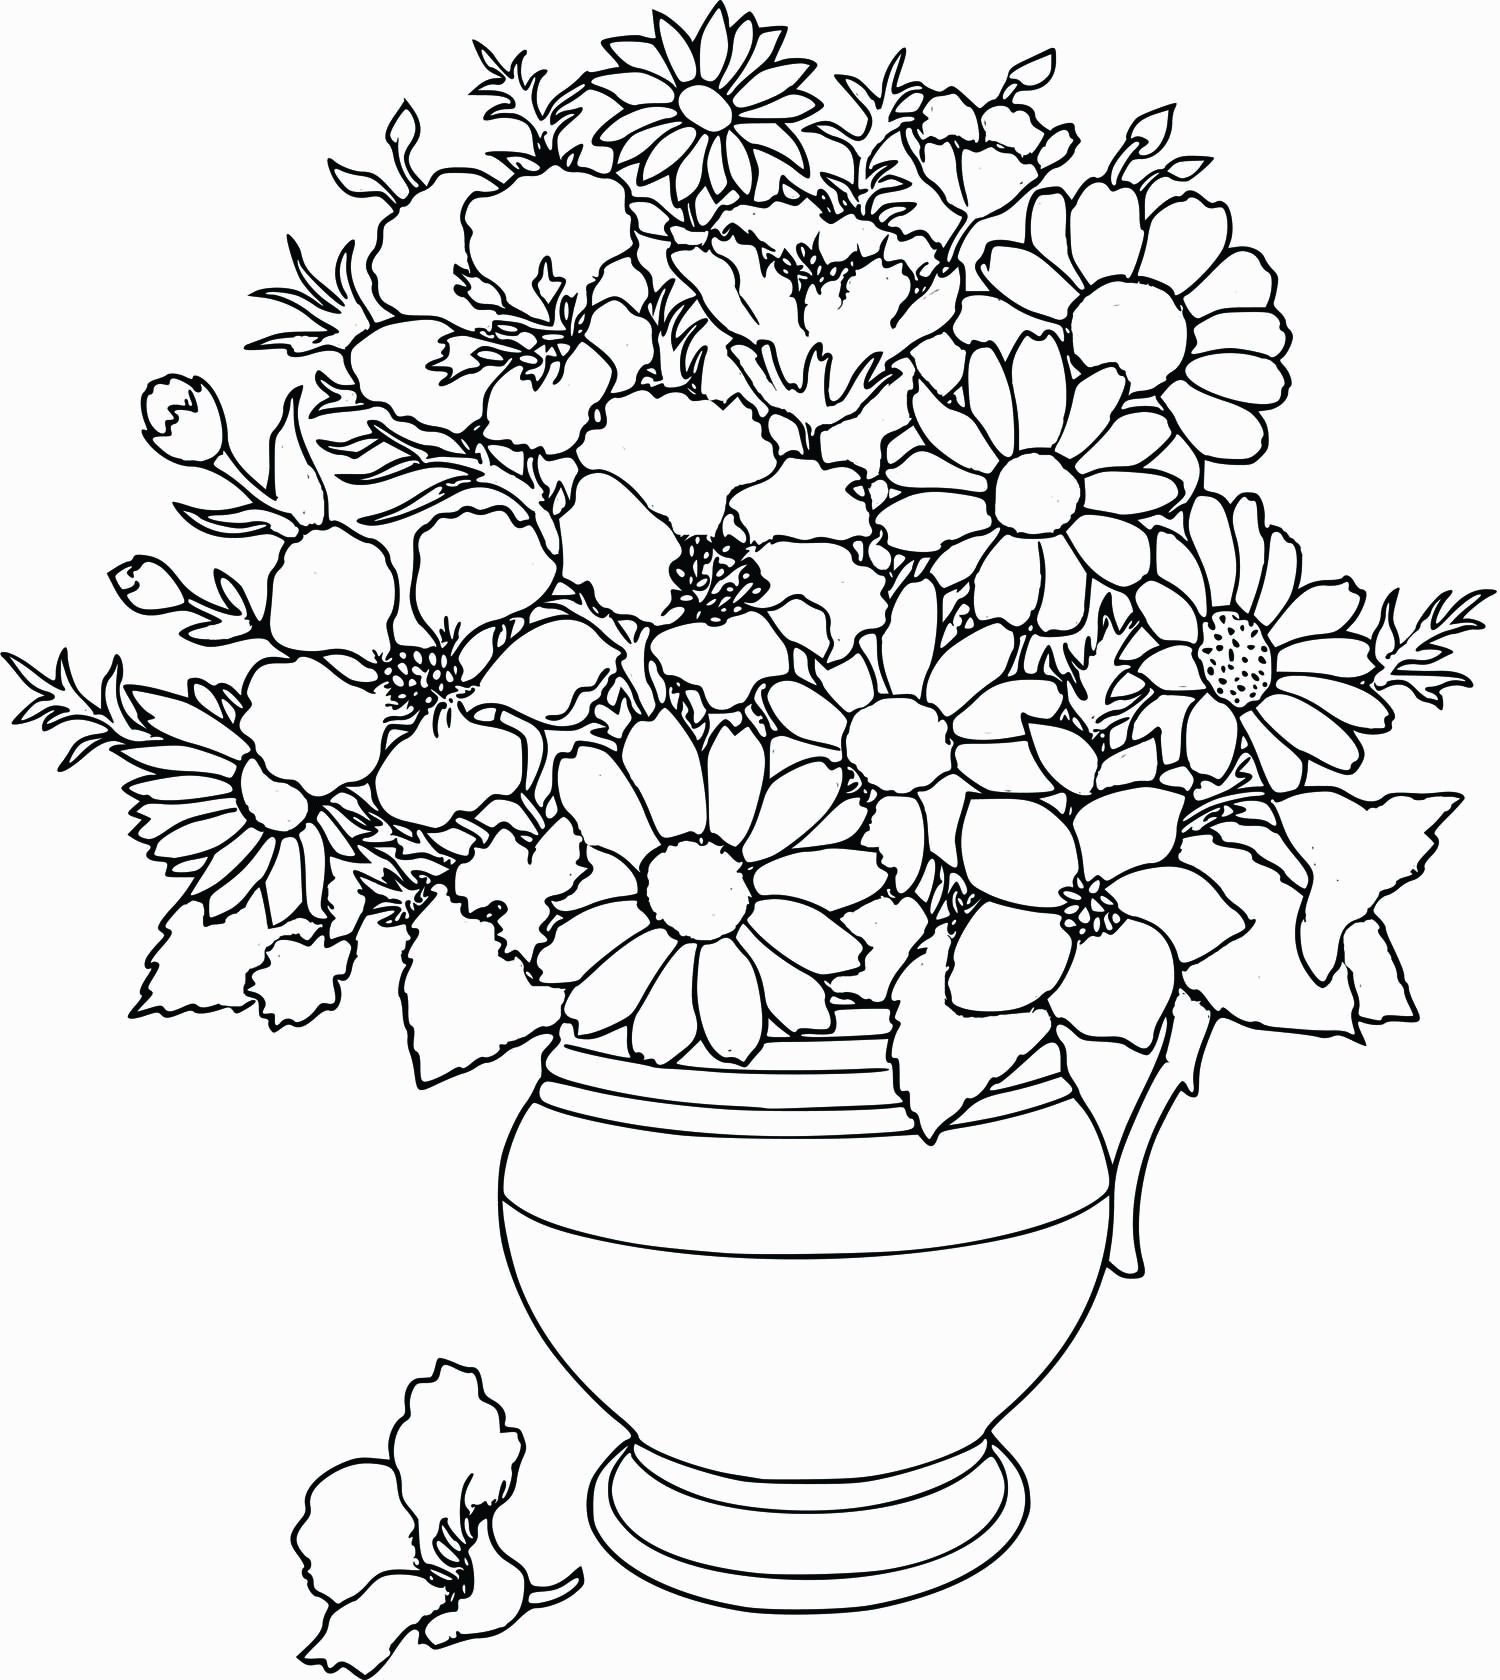 A Lot Of Flowers Coloring Pages - Coloring Pages For All Ages